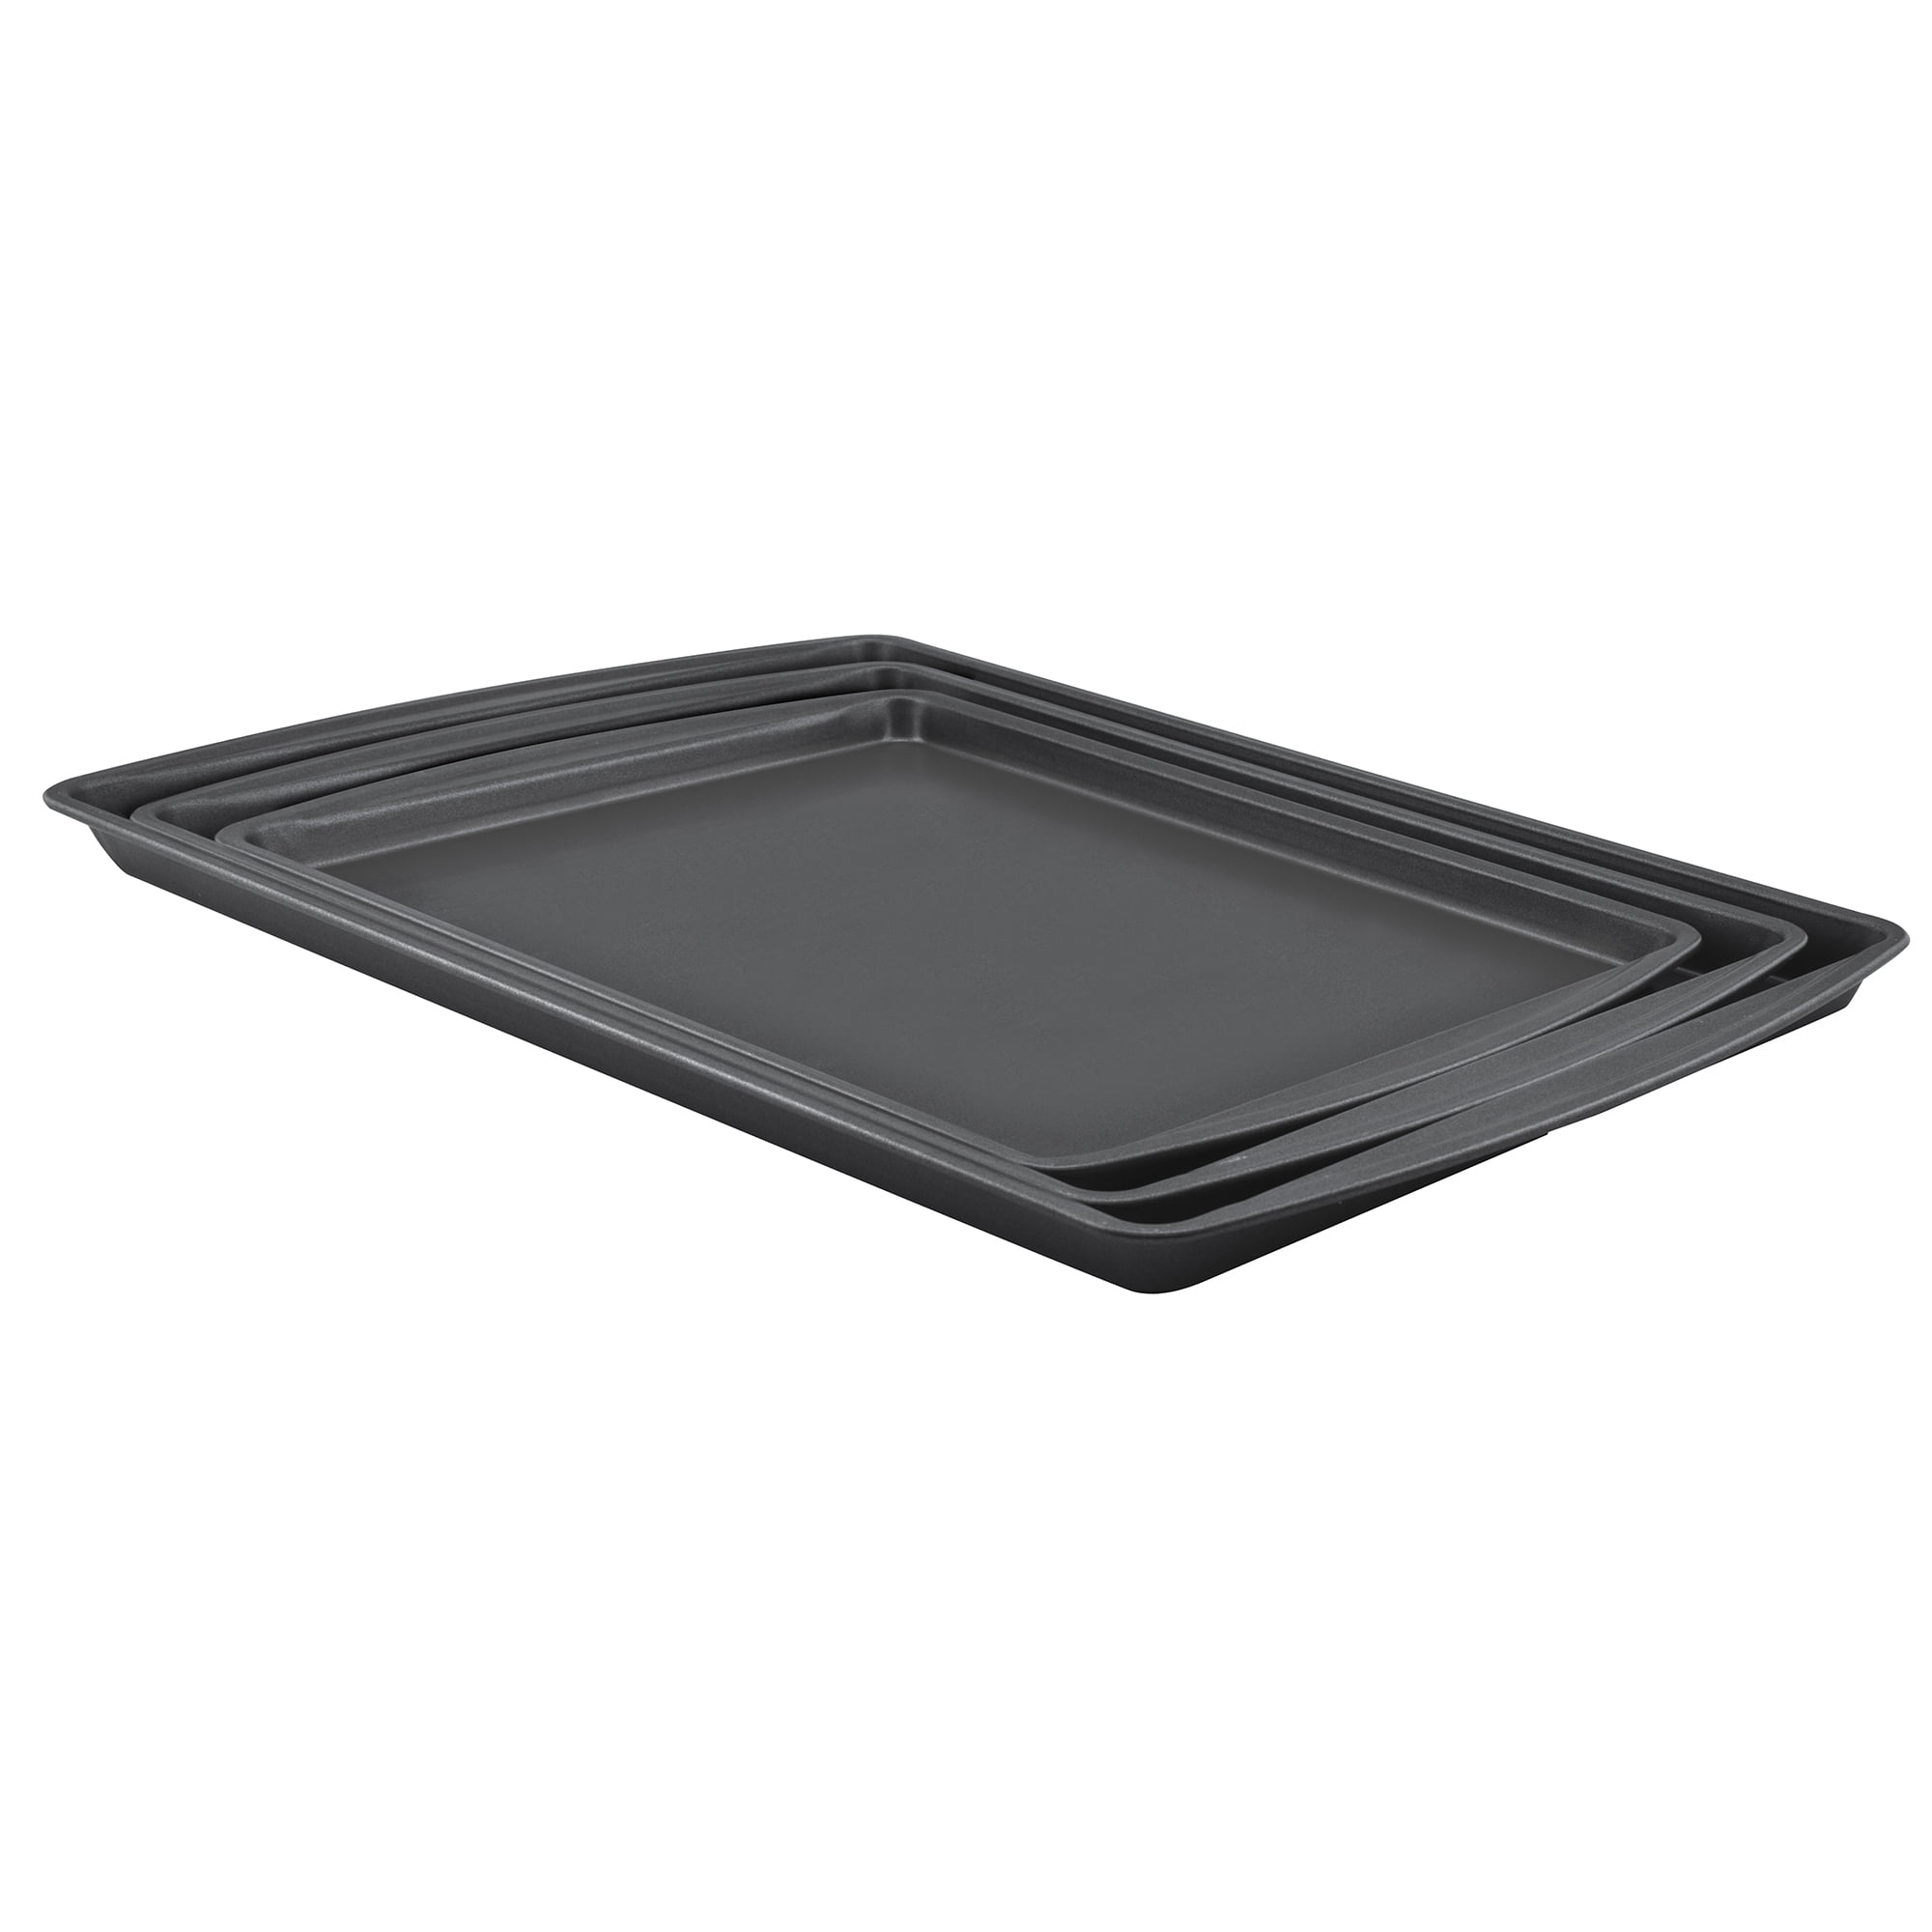 OvenStuff Non-Stick Large Cookie Sheet Pan